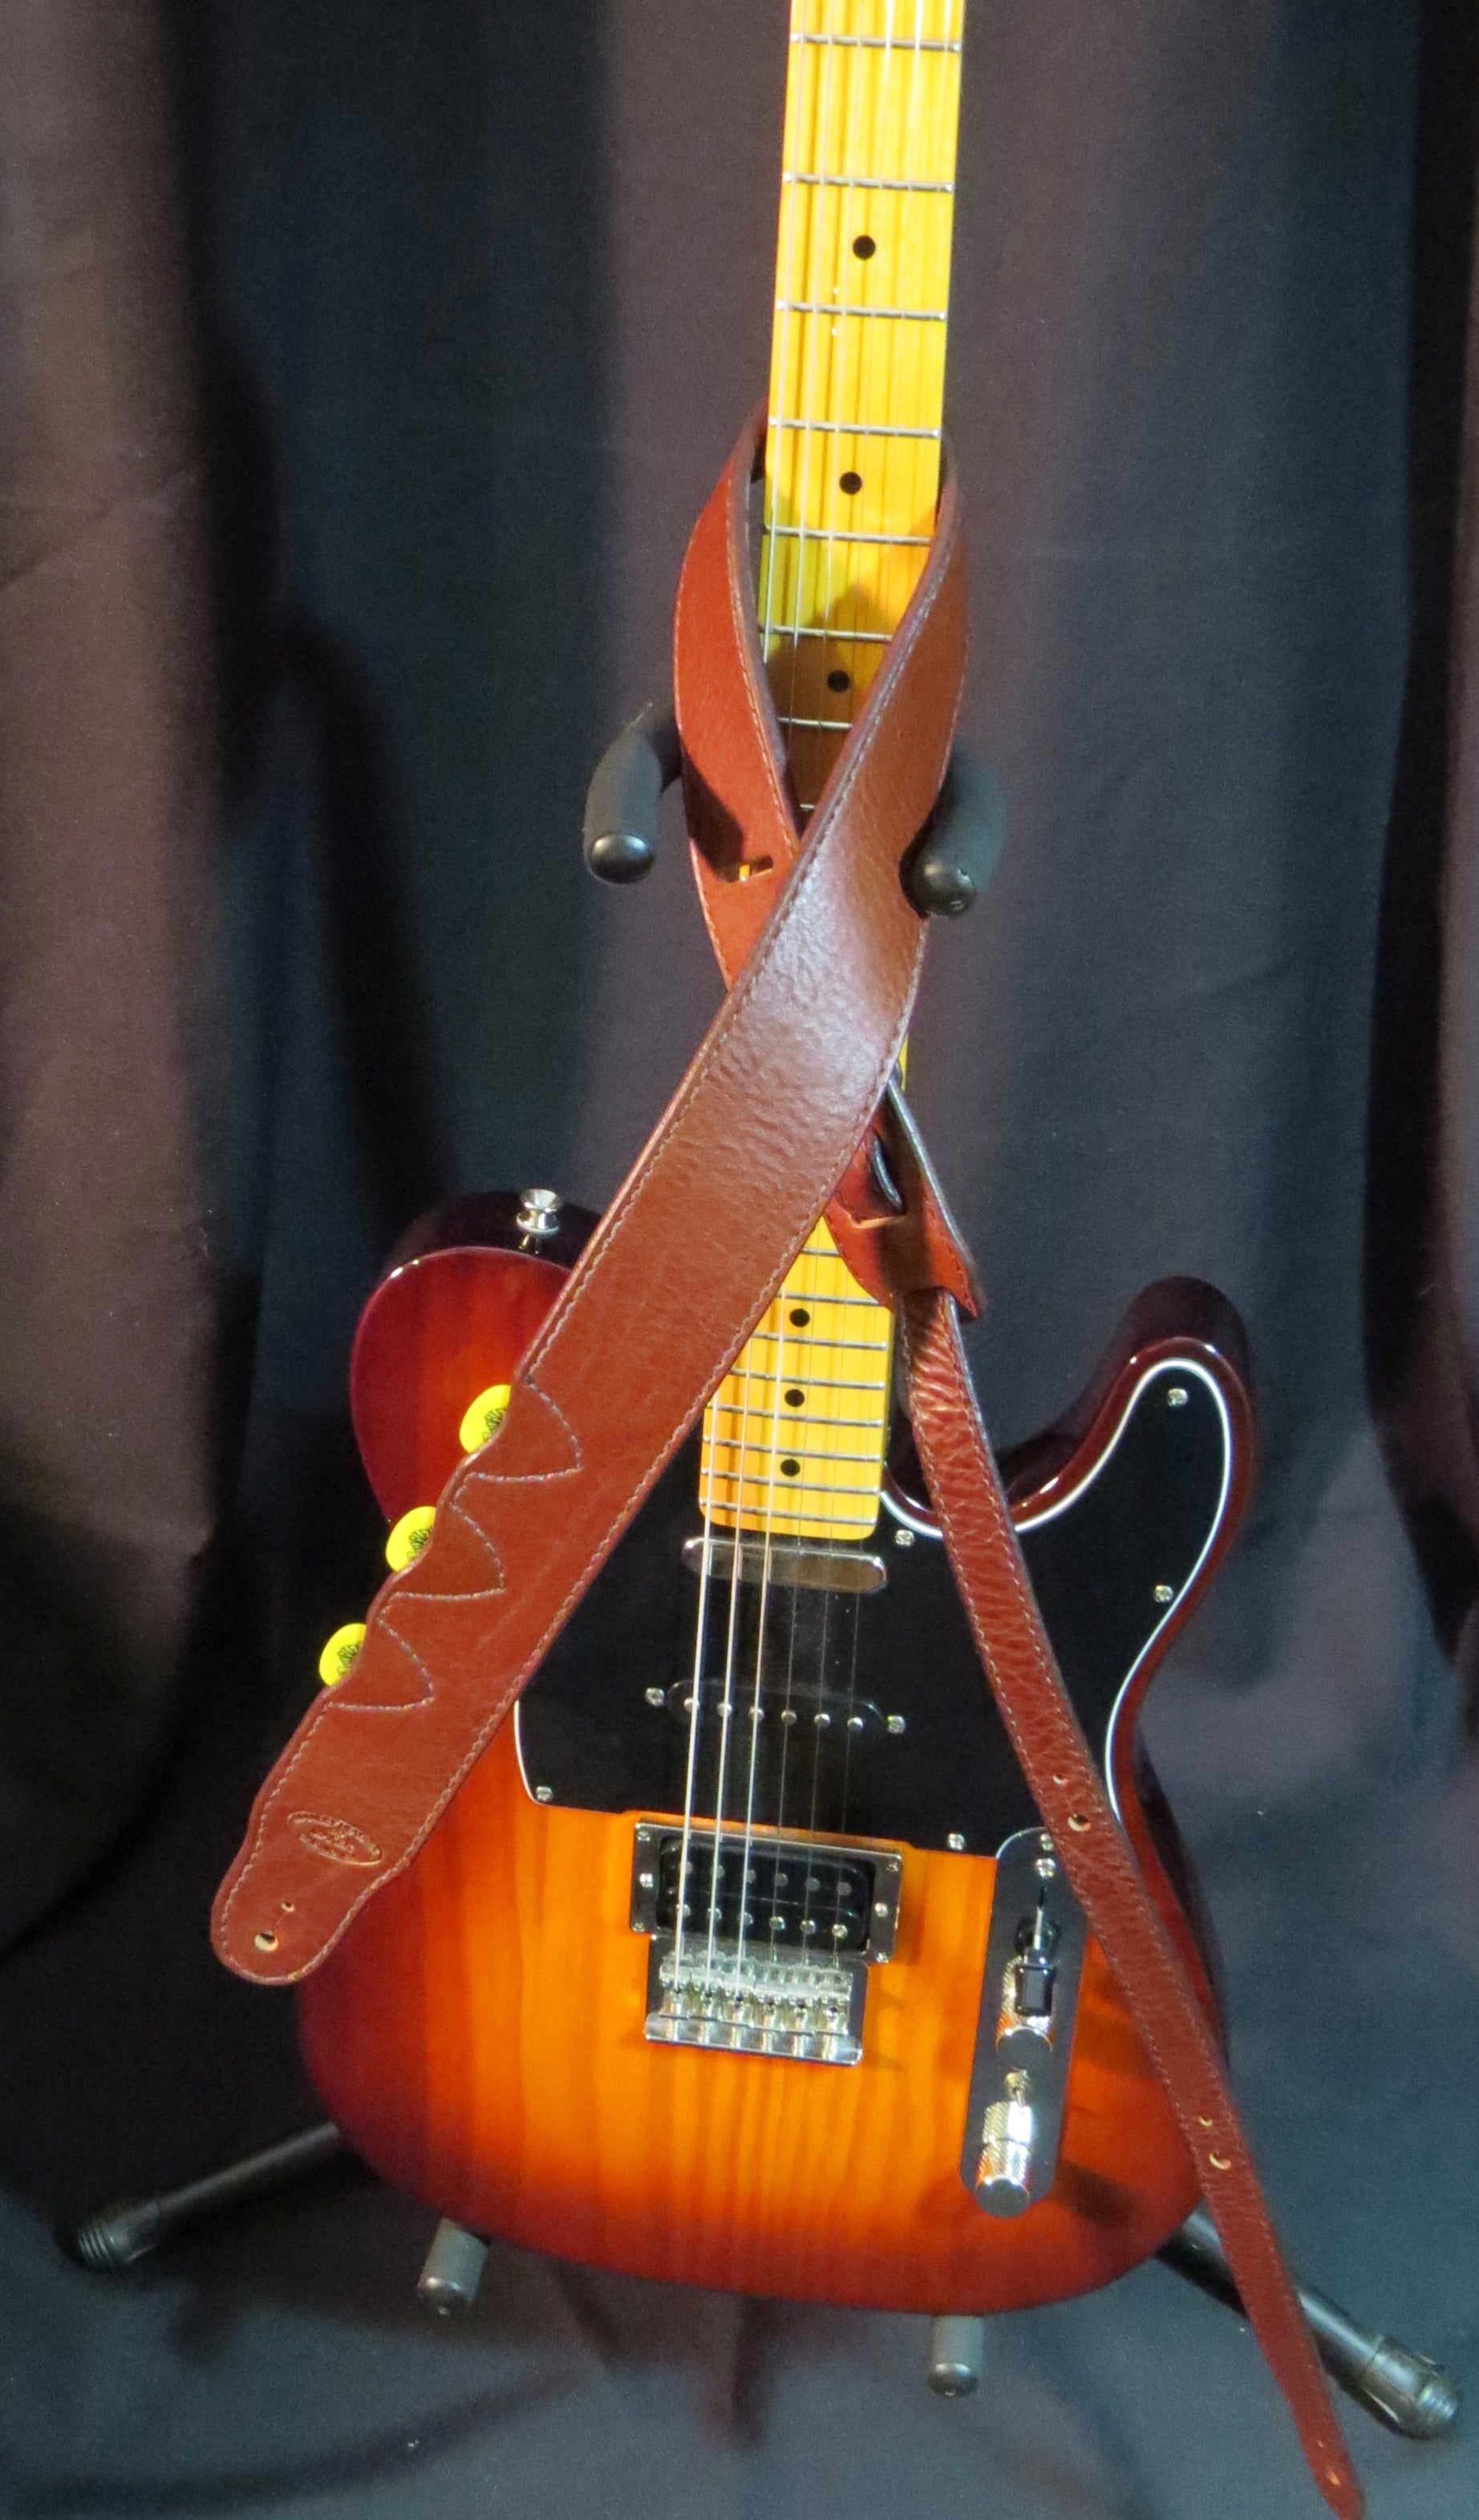 Leather Guitar Strap with Pick Holders, 2" wide